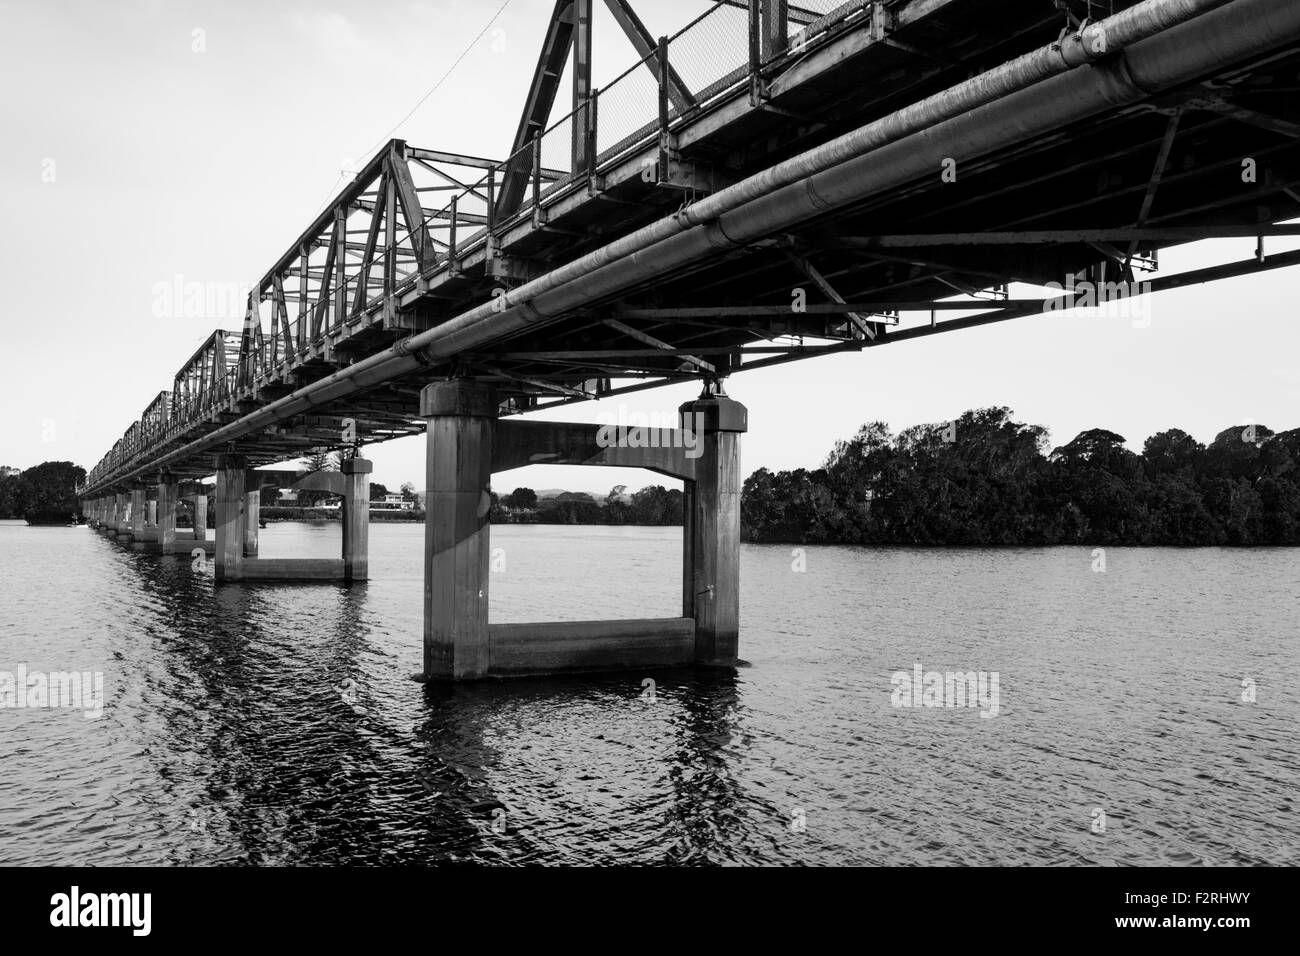 The Martin Bridge, constructed in 1938, is a road bridge over the Manning River in Taree, New South Wales, Australia. It is a 463m steel truss bridge Stock Photo